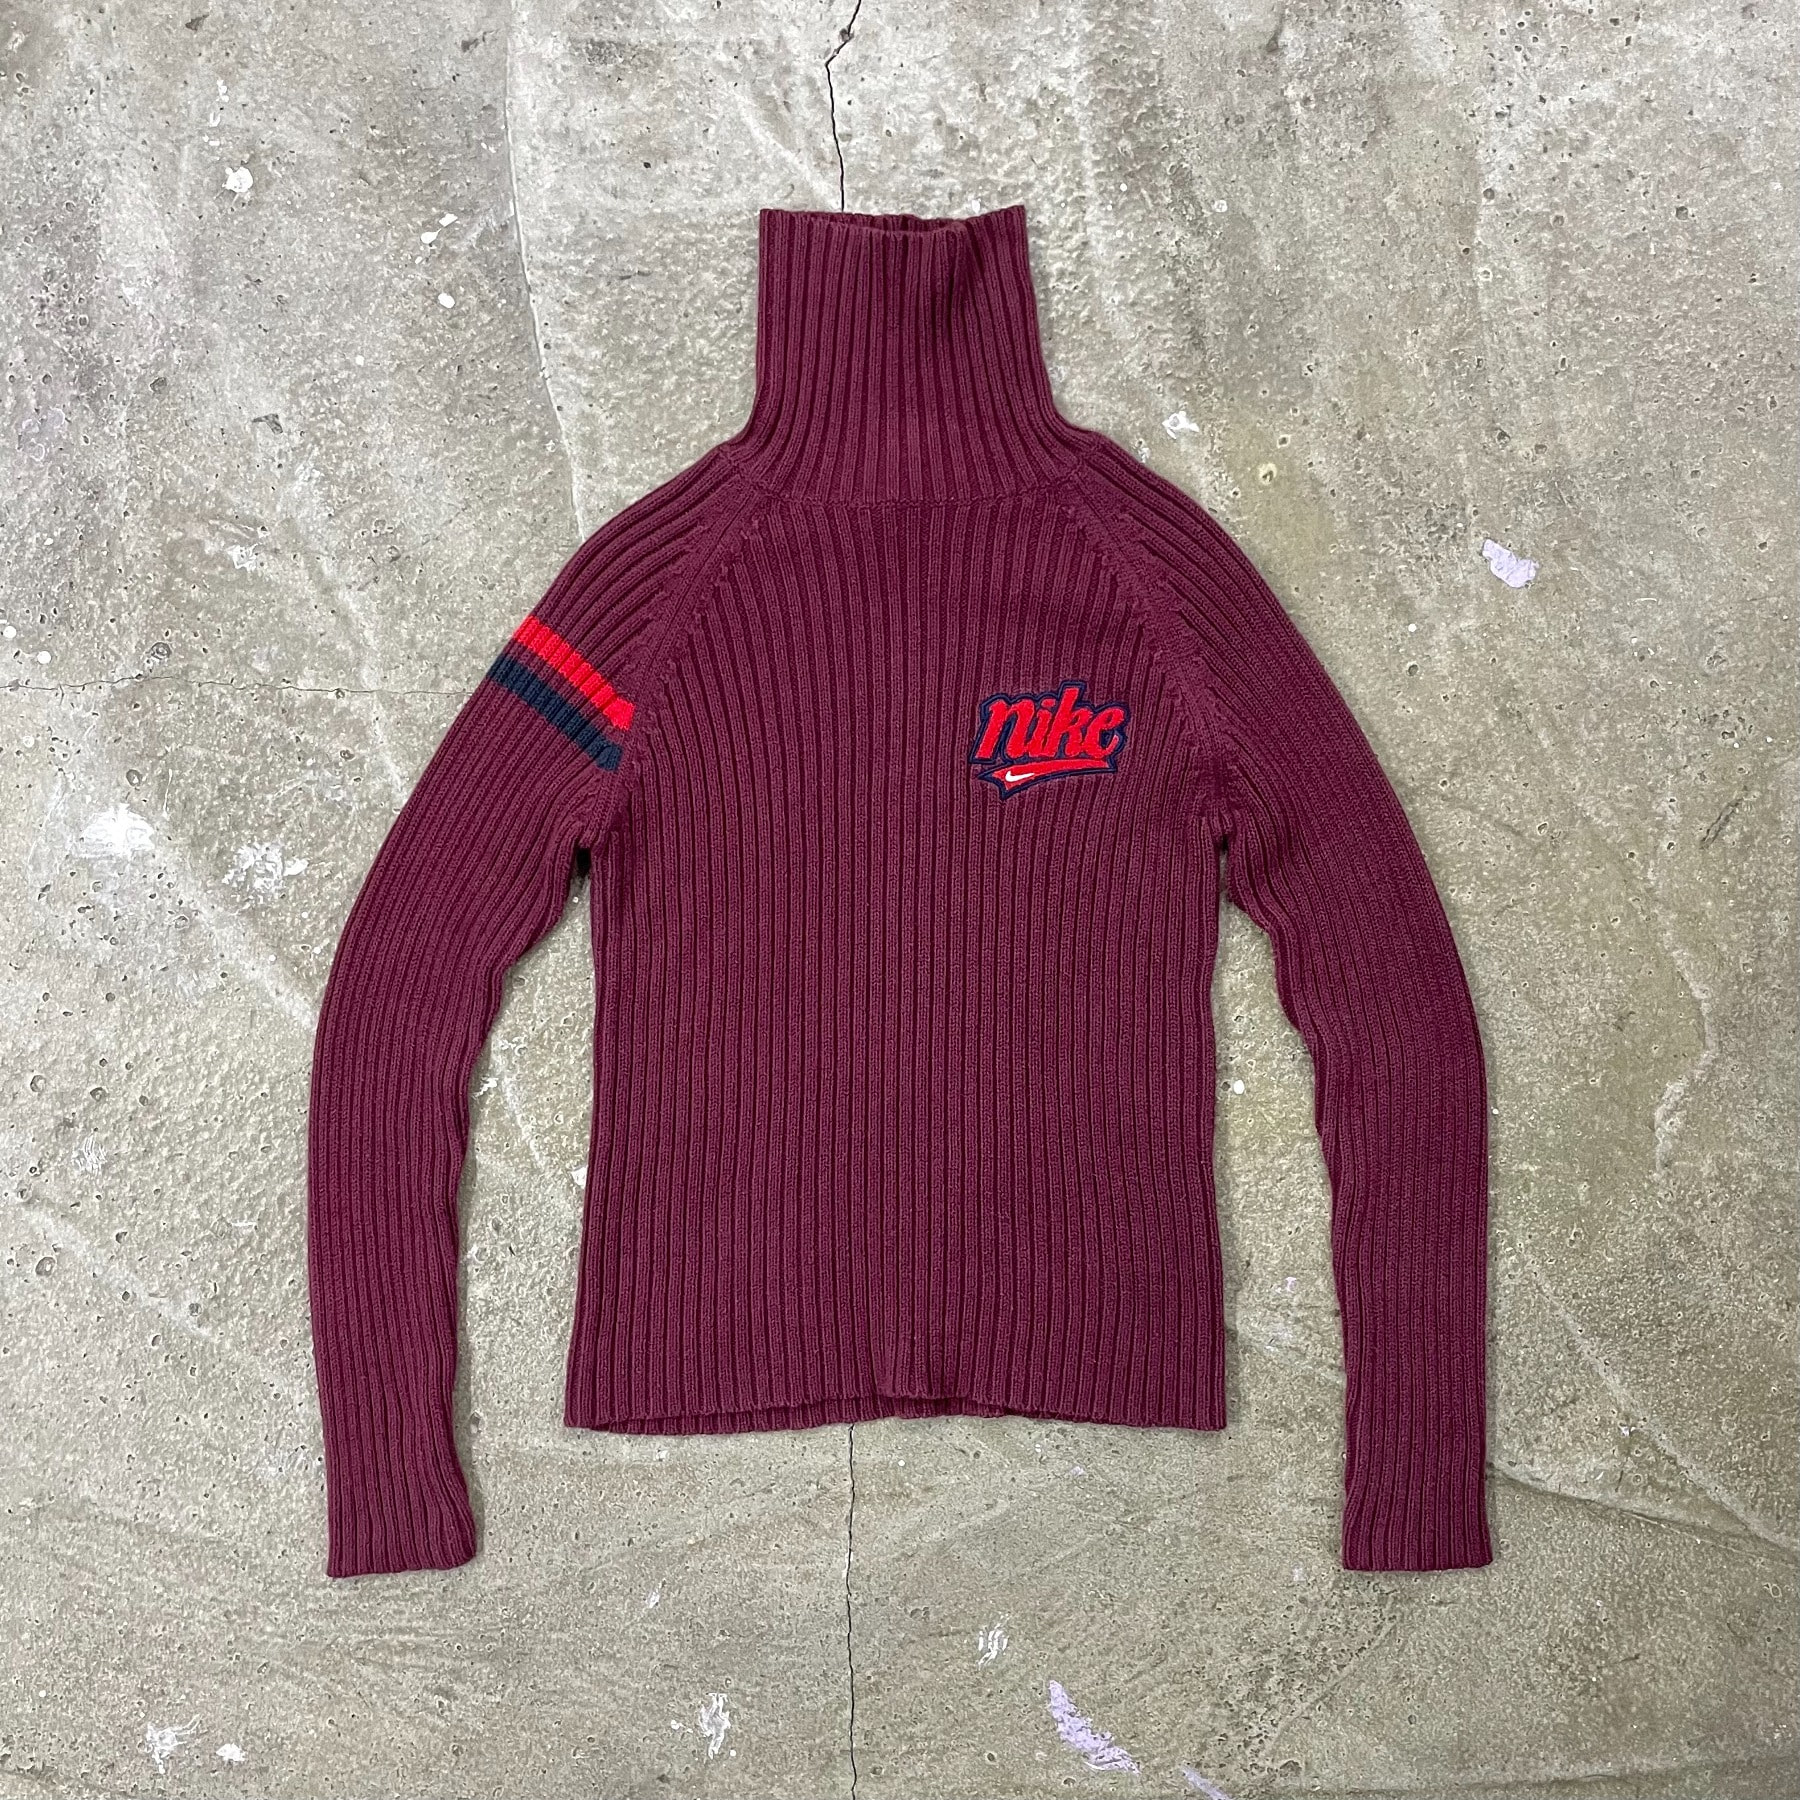 00&#039;s NIKE Turtle Neck Sweater - Size M